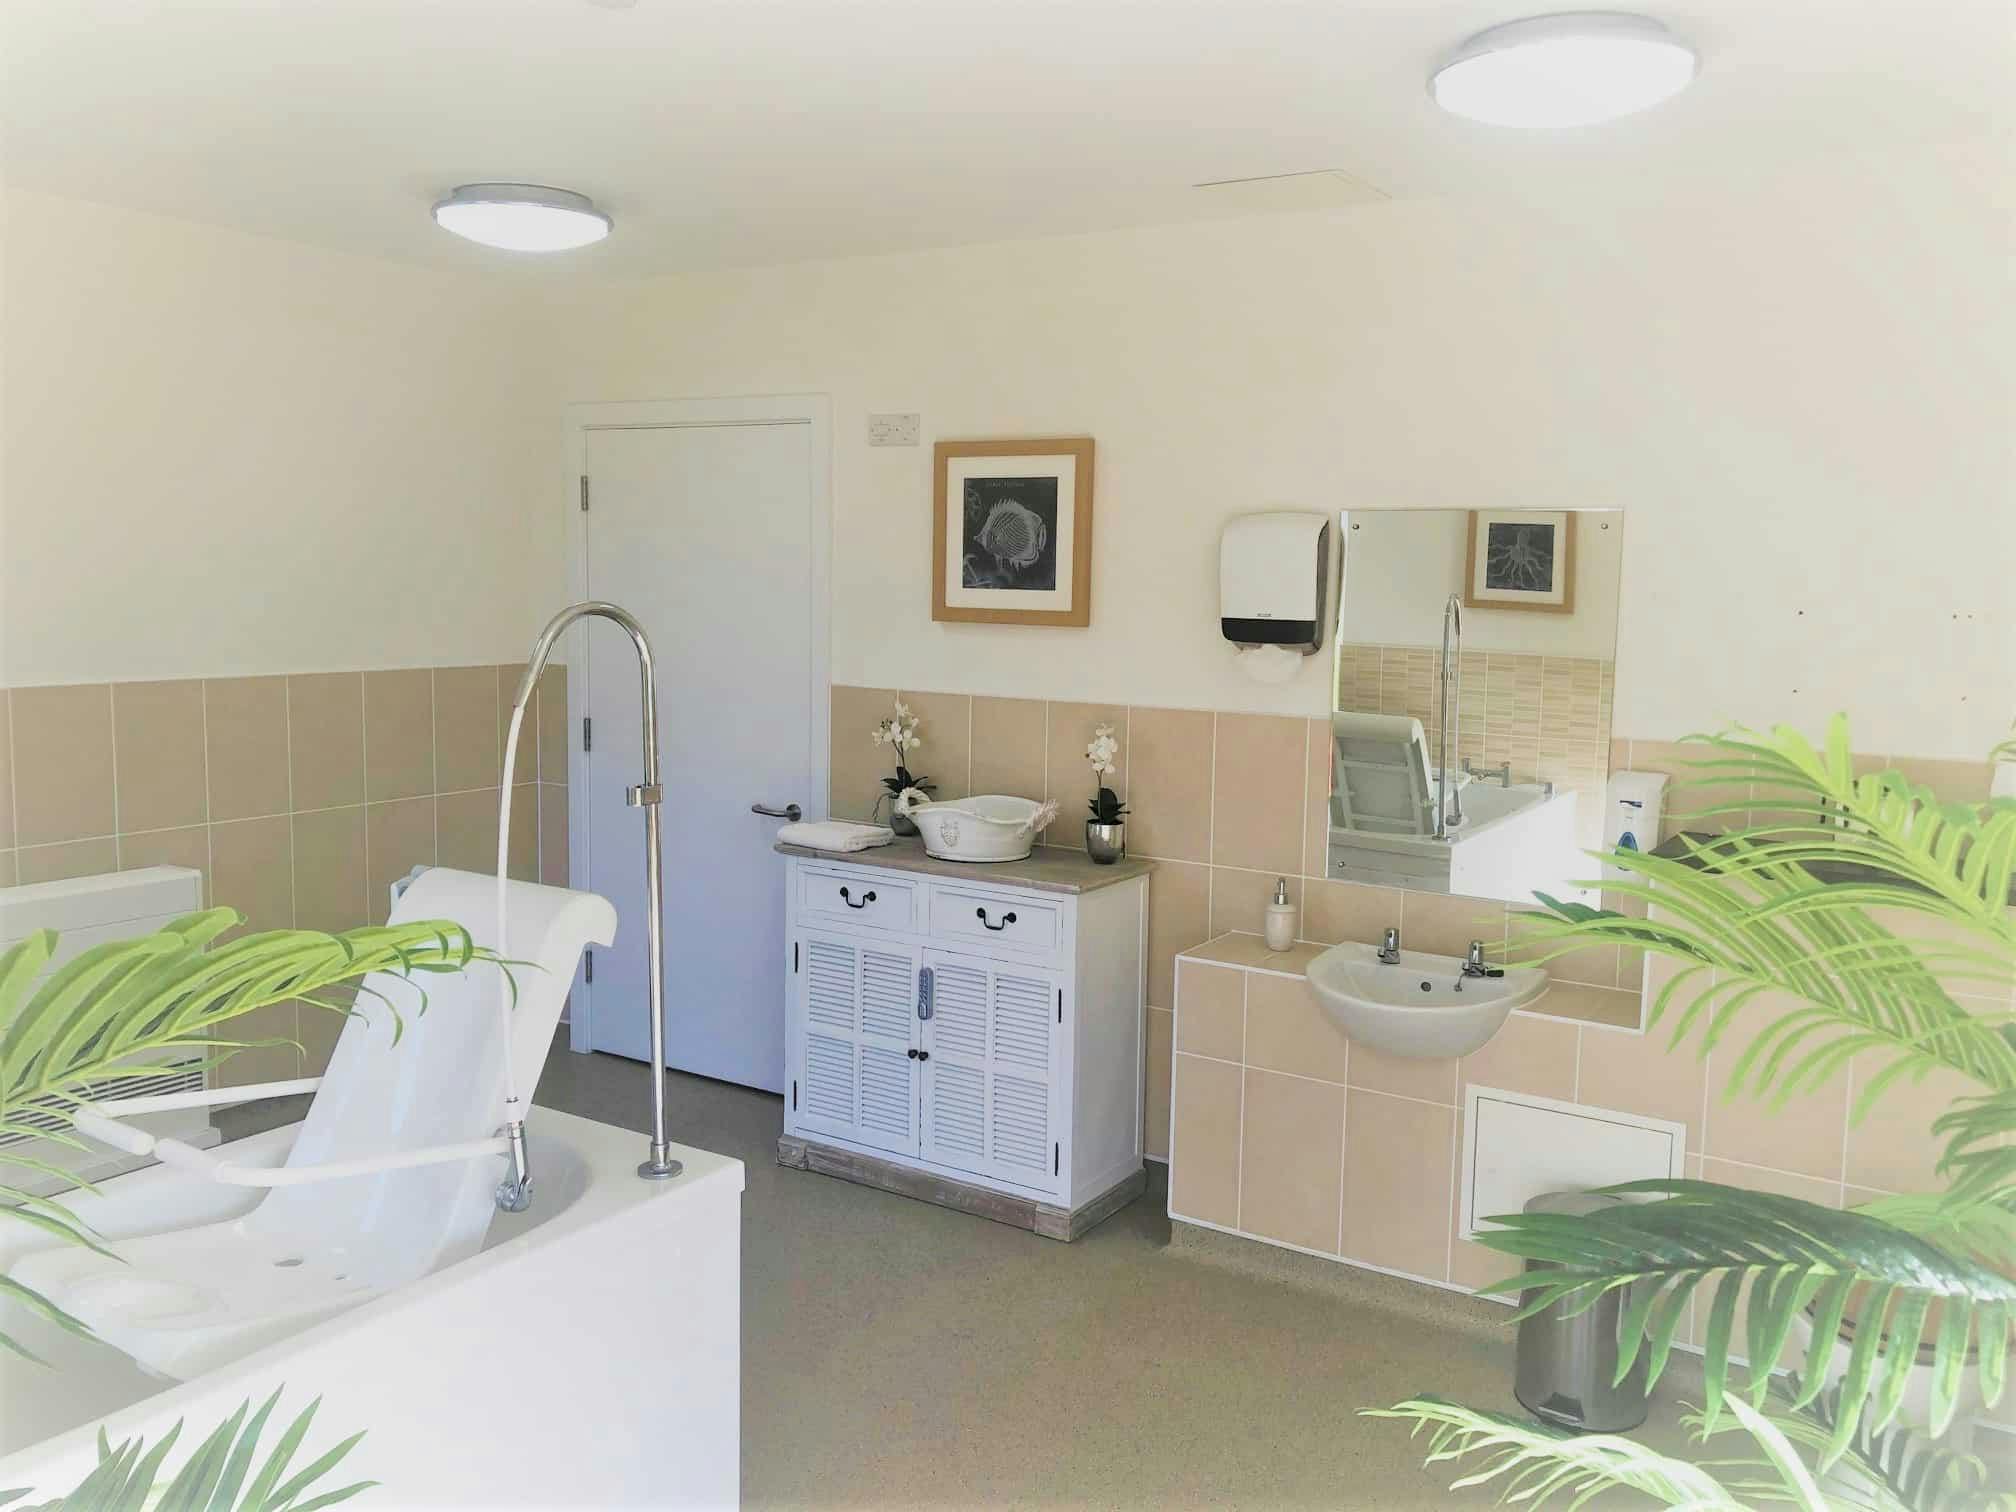 Bathroom at Wellington Vale Care Home in Portsmouth, Hampshire